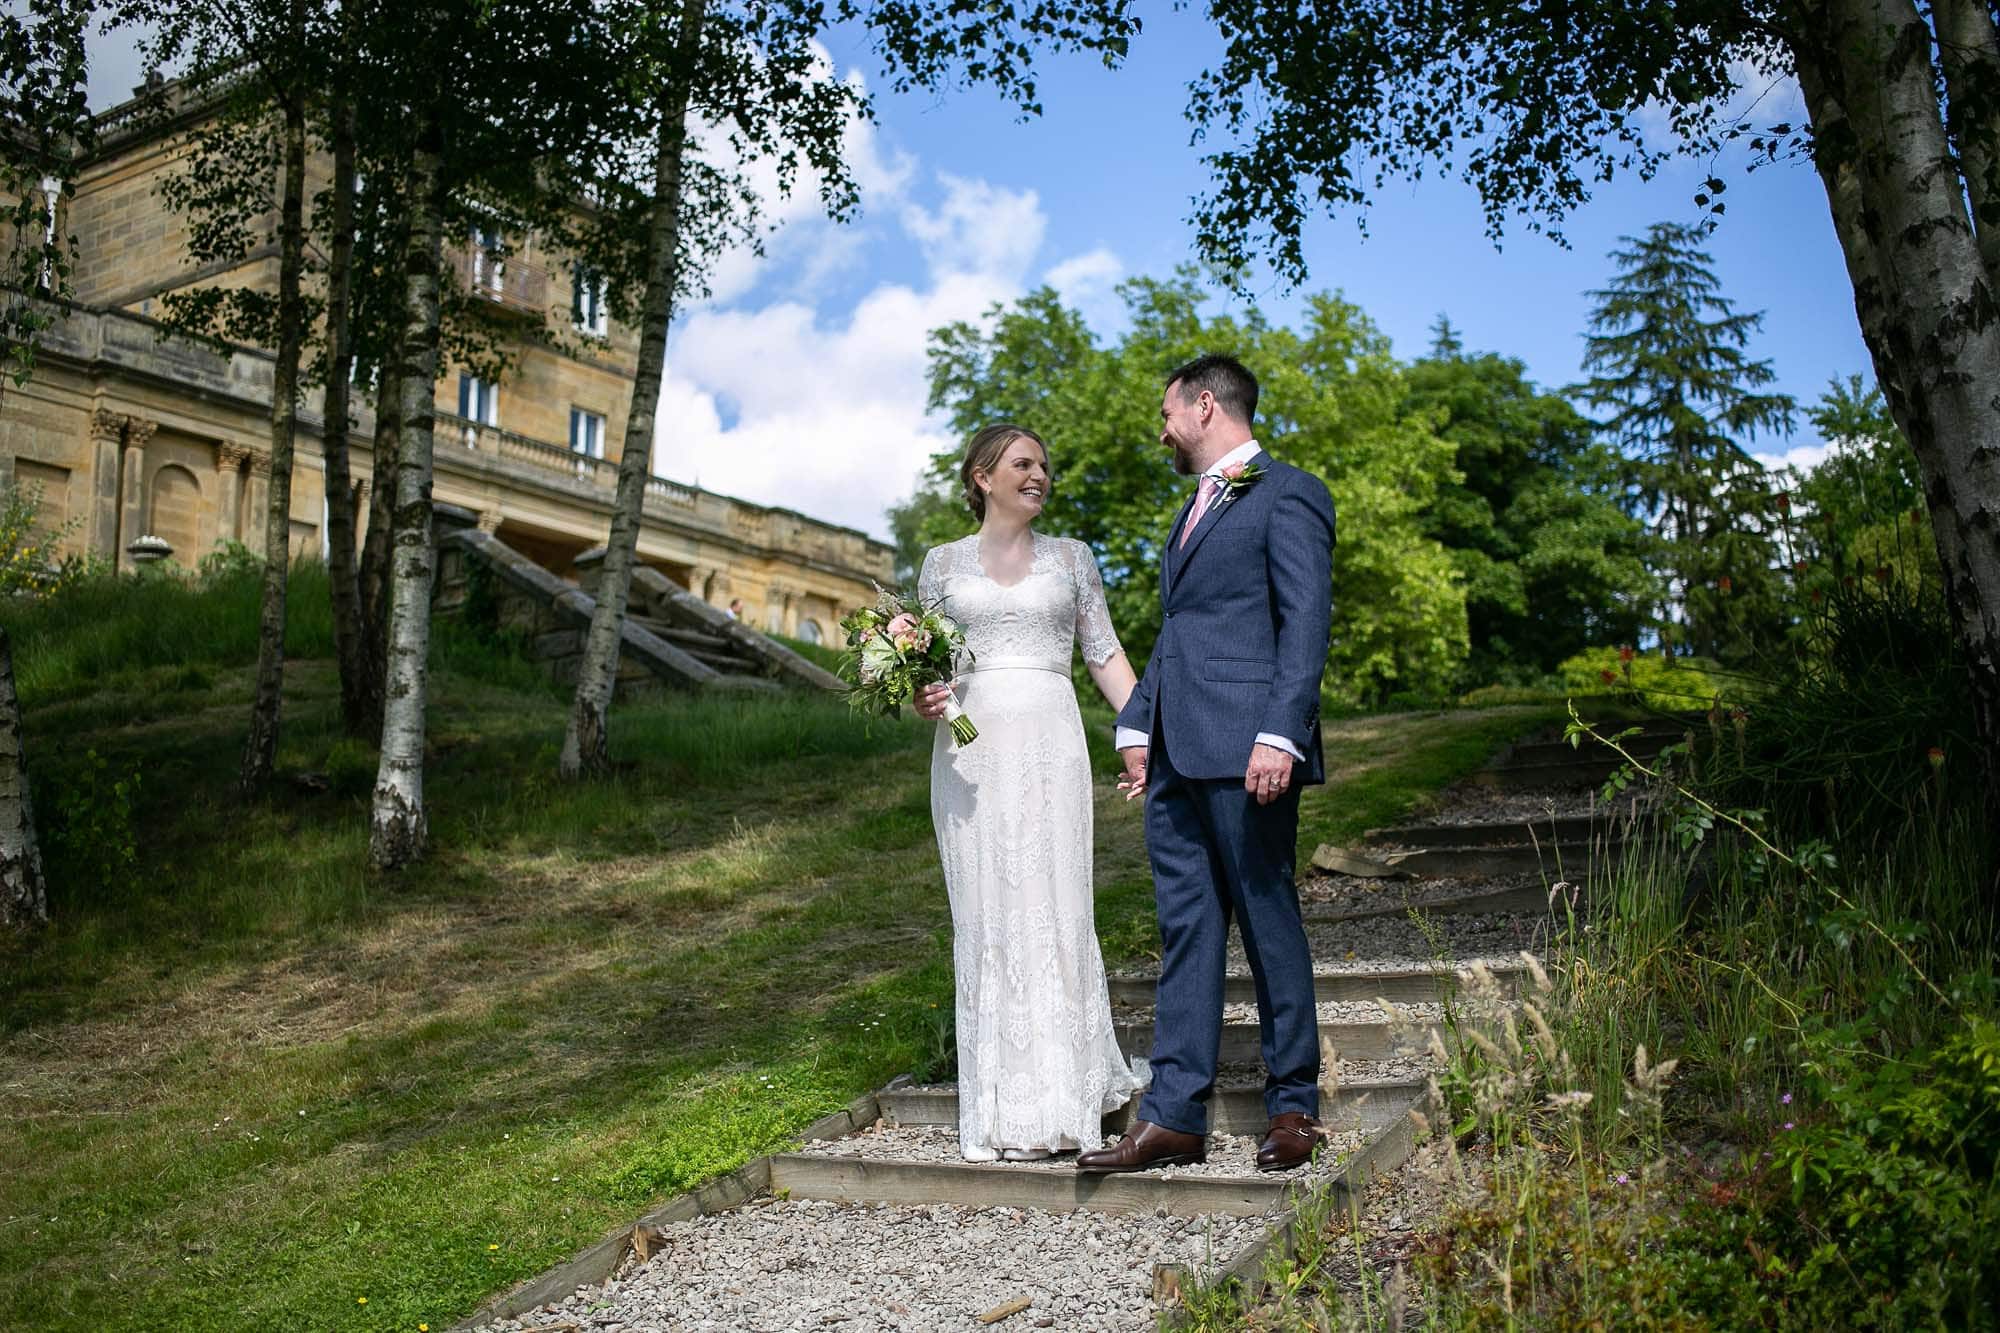 Newly Weds Christy and Oli walking down a path outside salomons estate